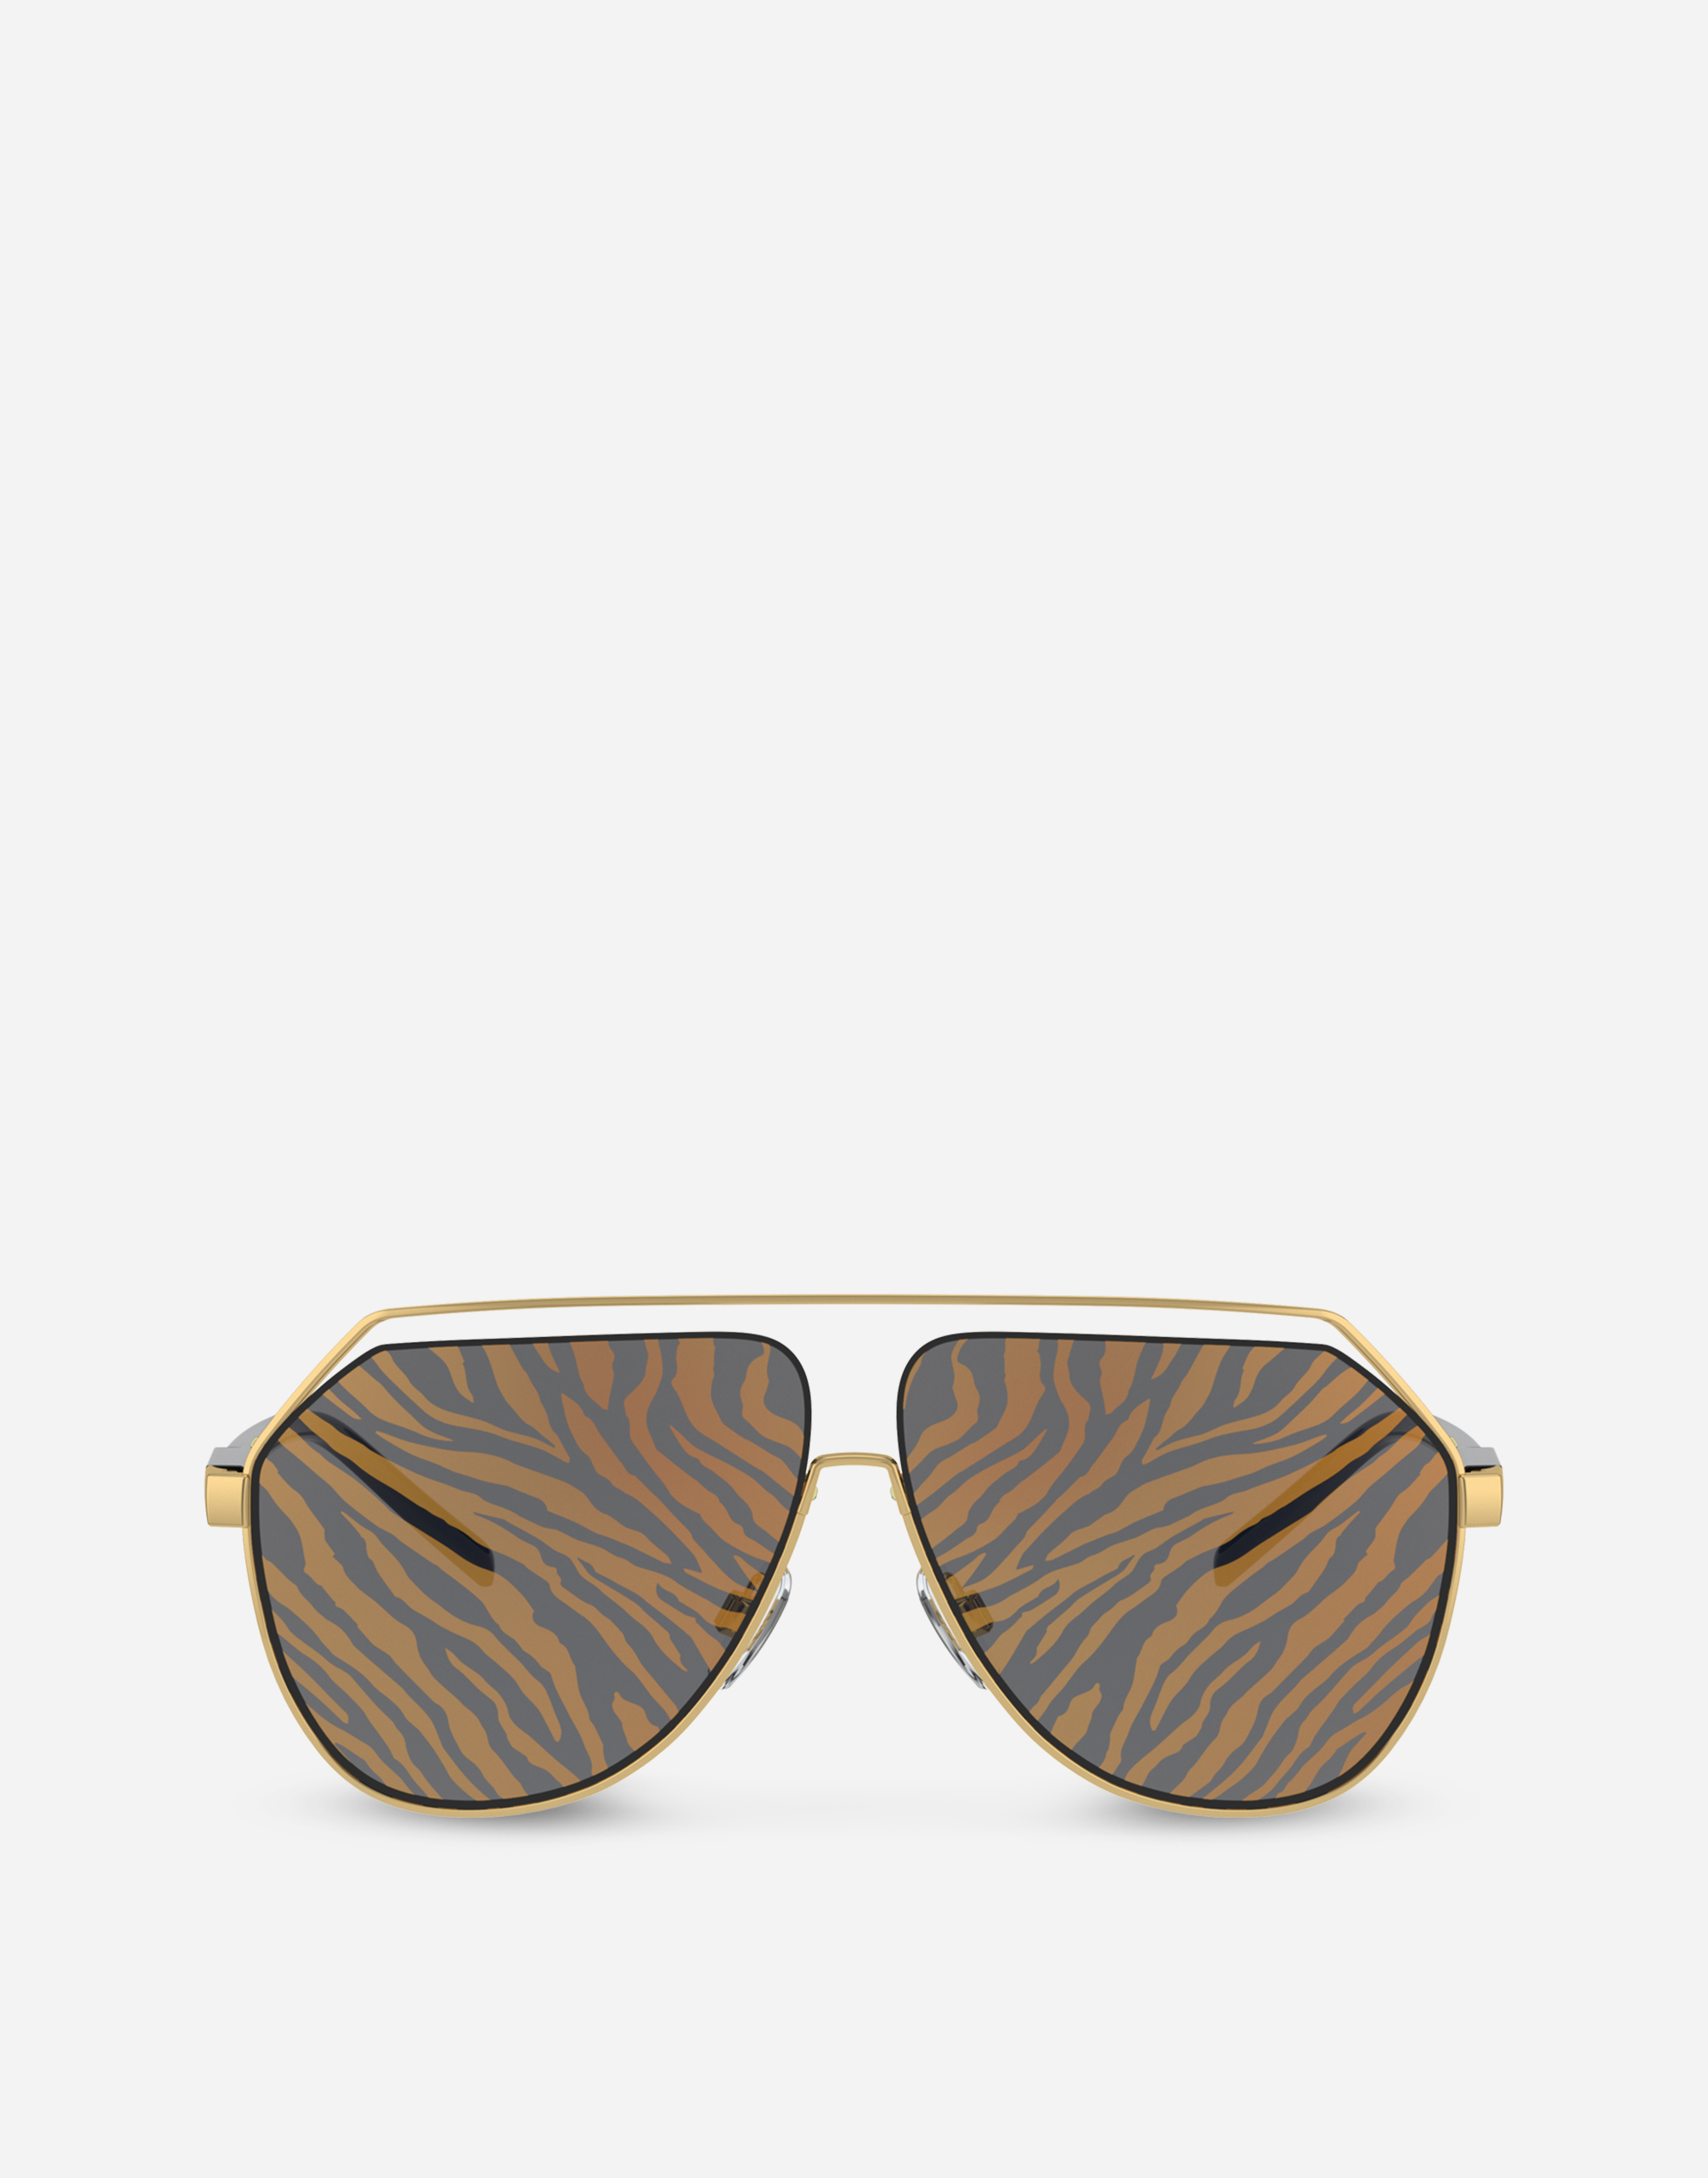 Lunar new year sunglasses in Black and Gold